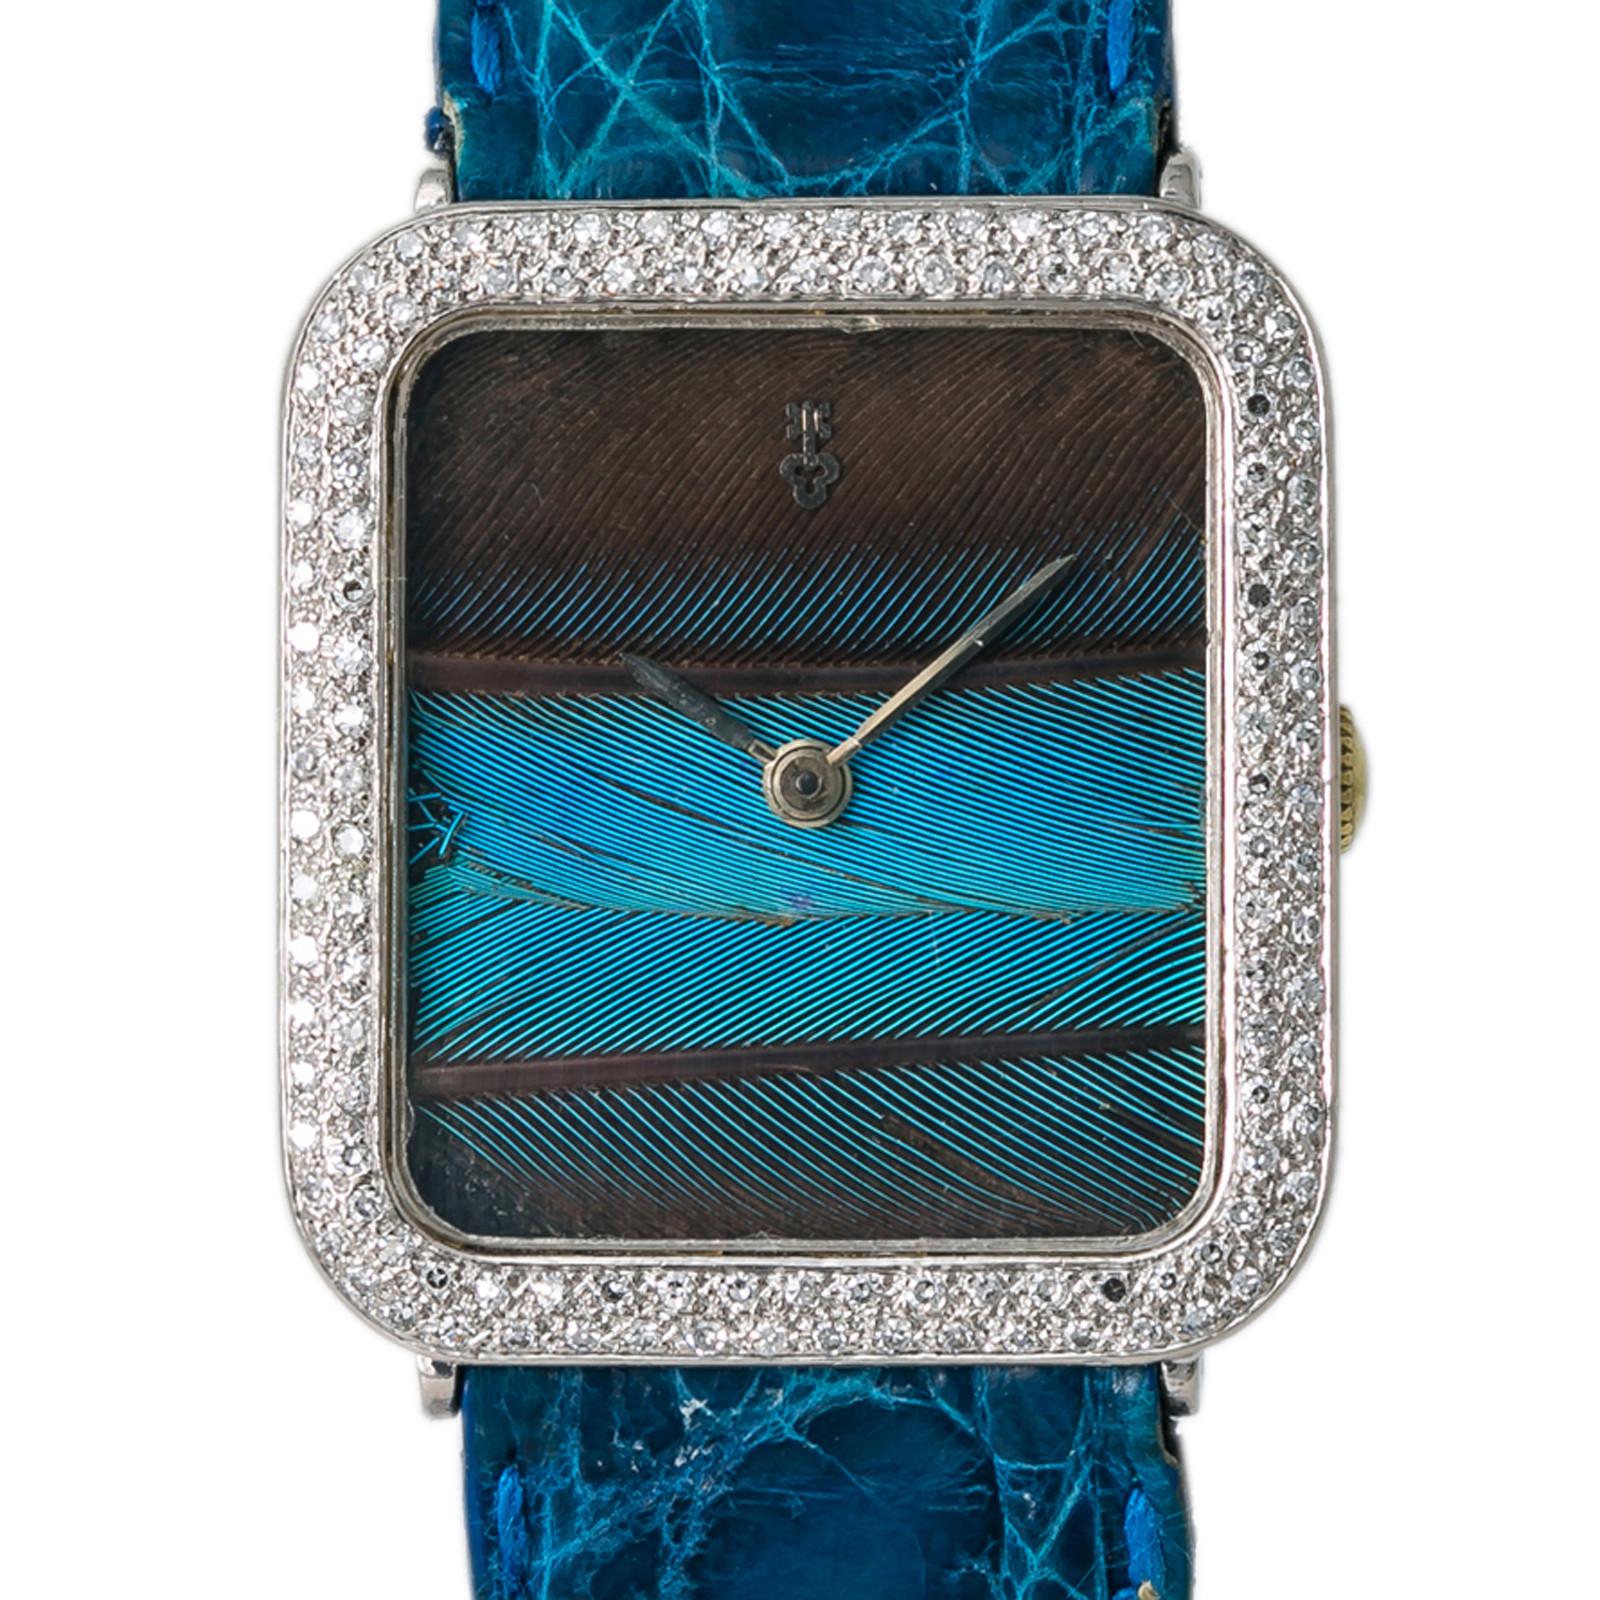 Corum Peacock Feather 27536/7623 Unisex Hand Wind 18k White Gold Diamonds Watch In Excellent Condition For Sale In Miami, FL